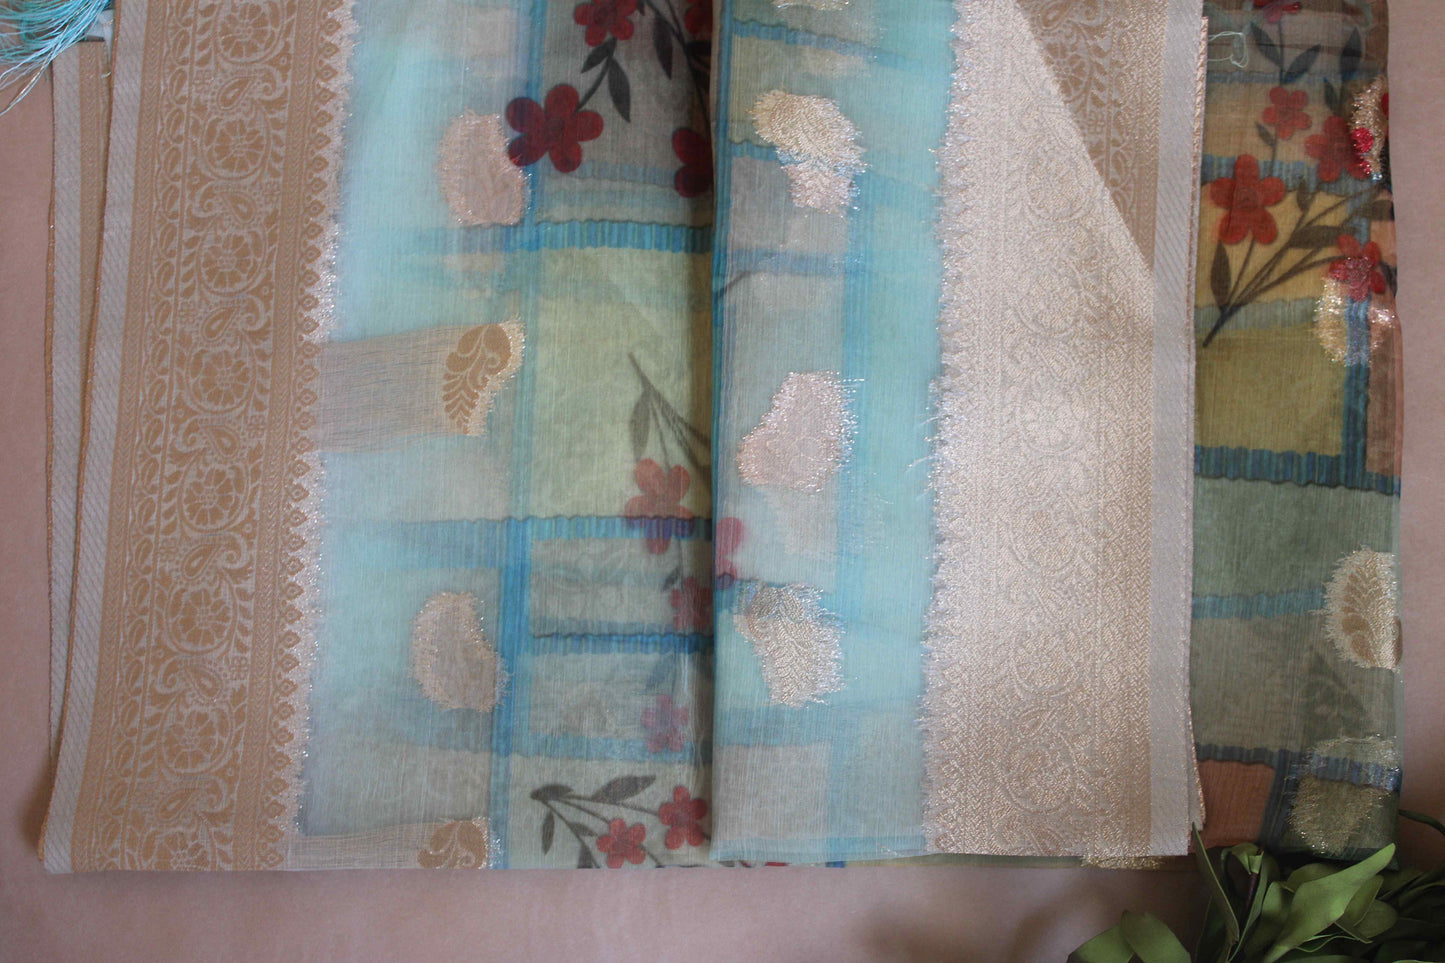 Banarasi Multicolor Organza Sheer Silk Dupatta with Sky Blue base, gold weaving, Indian traditional and Festive wear, Unique floral prints